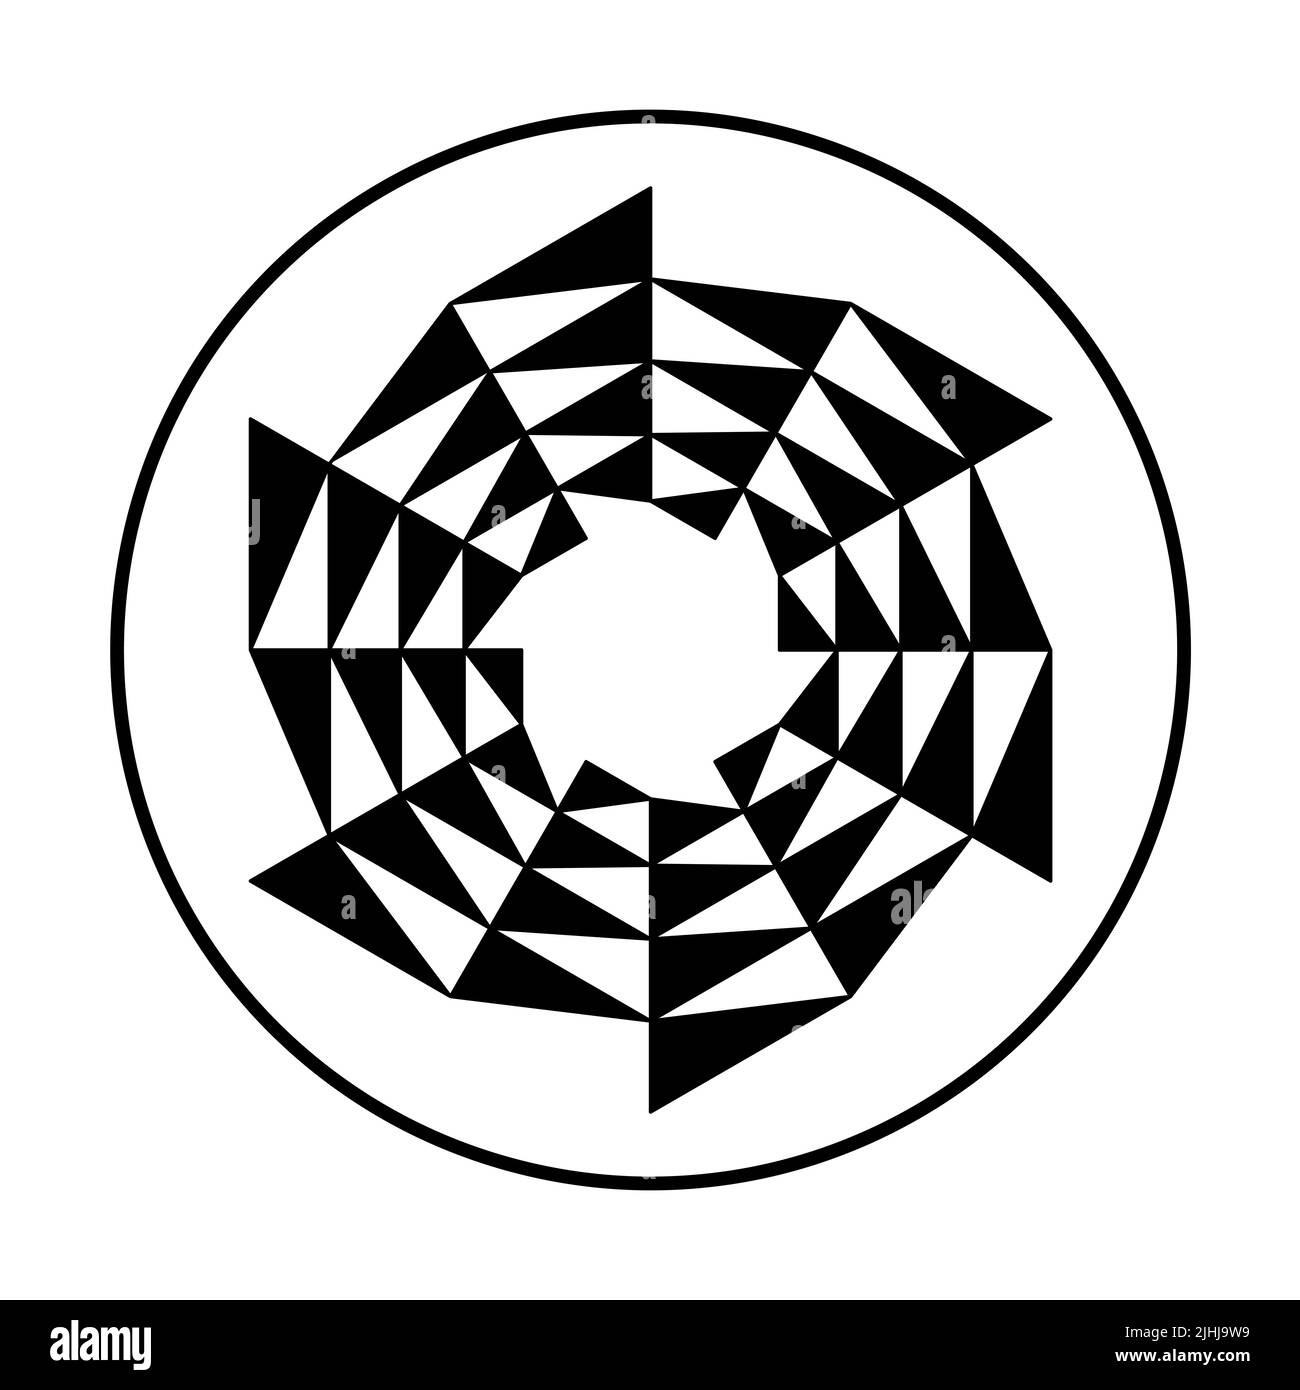 Circular saw blade shaped, triangle pattern in a circle. Black triangles forming a circular saw blade, moving clockwise, as symbol for change. Stock Photo